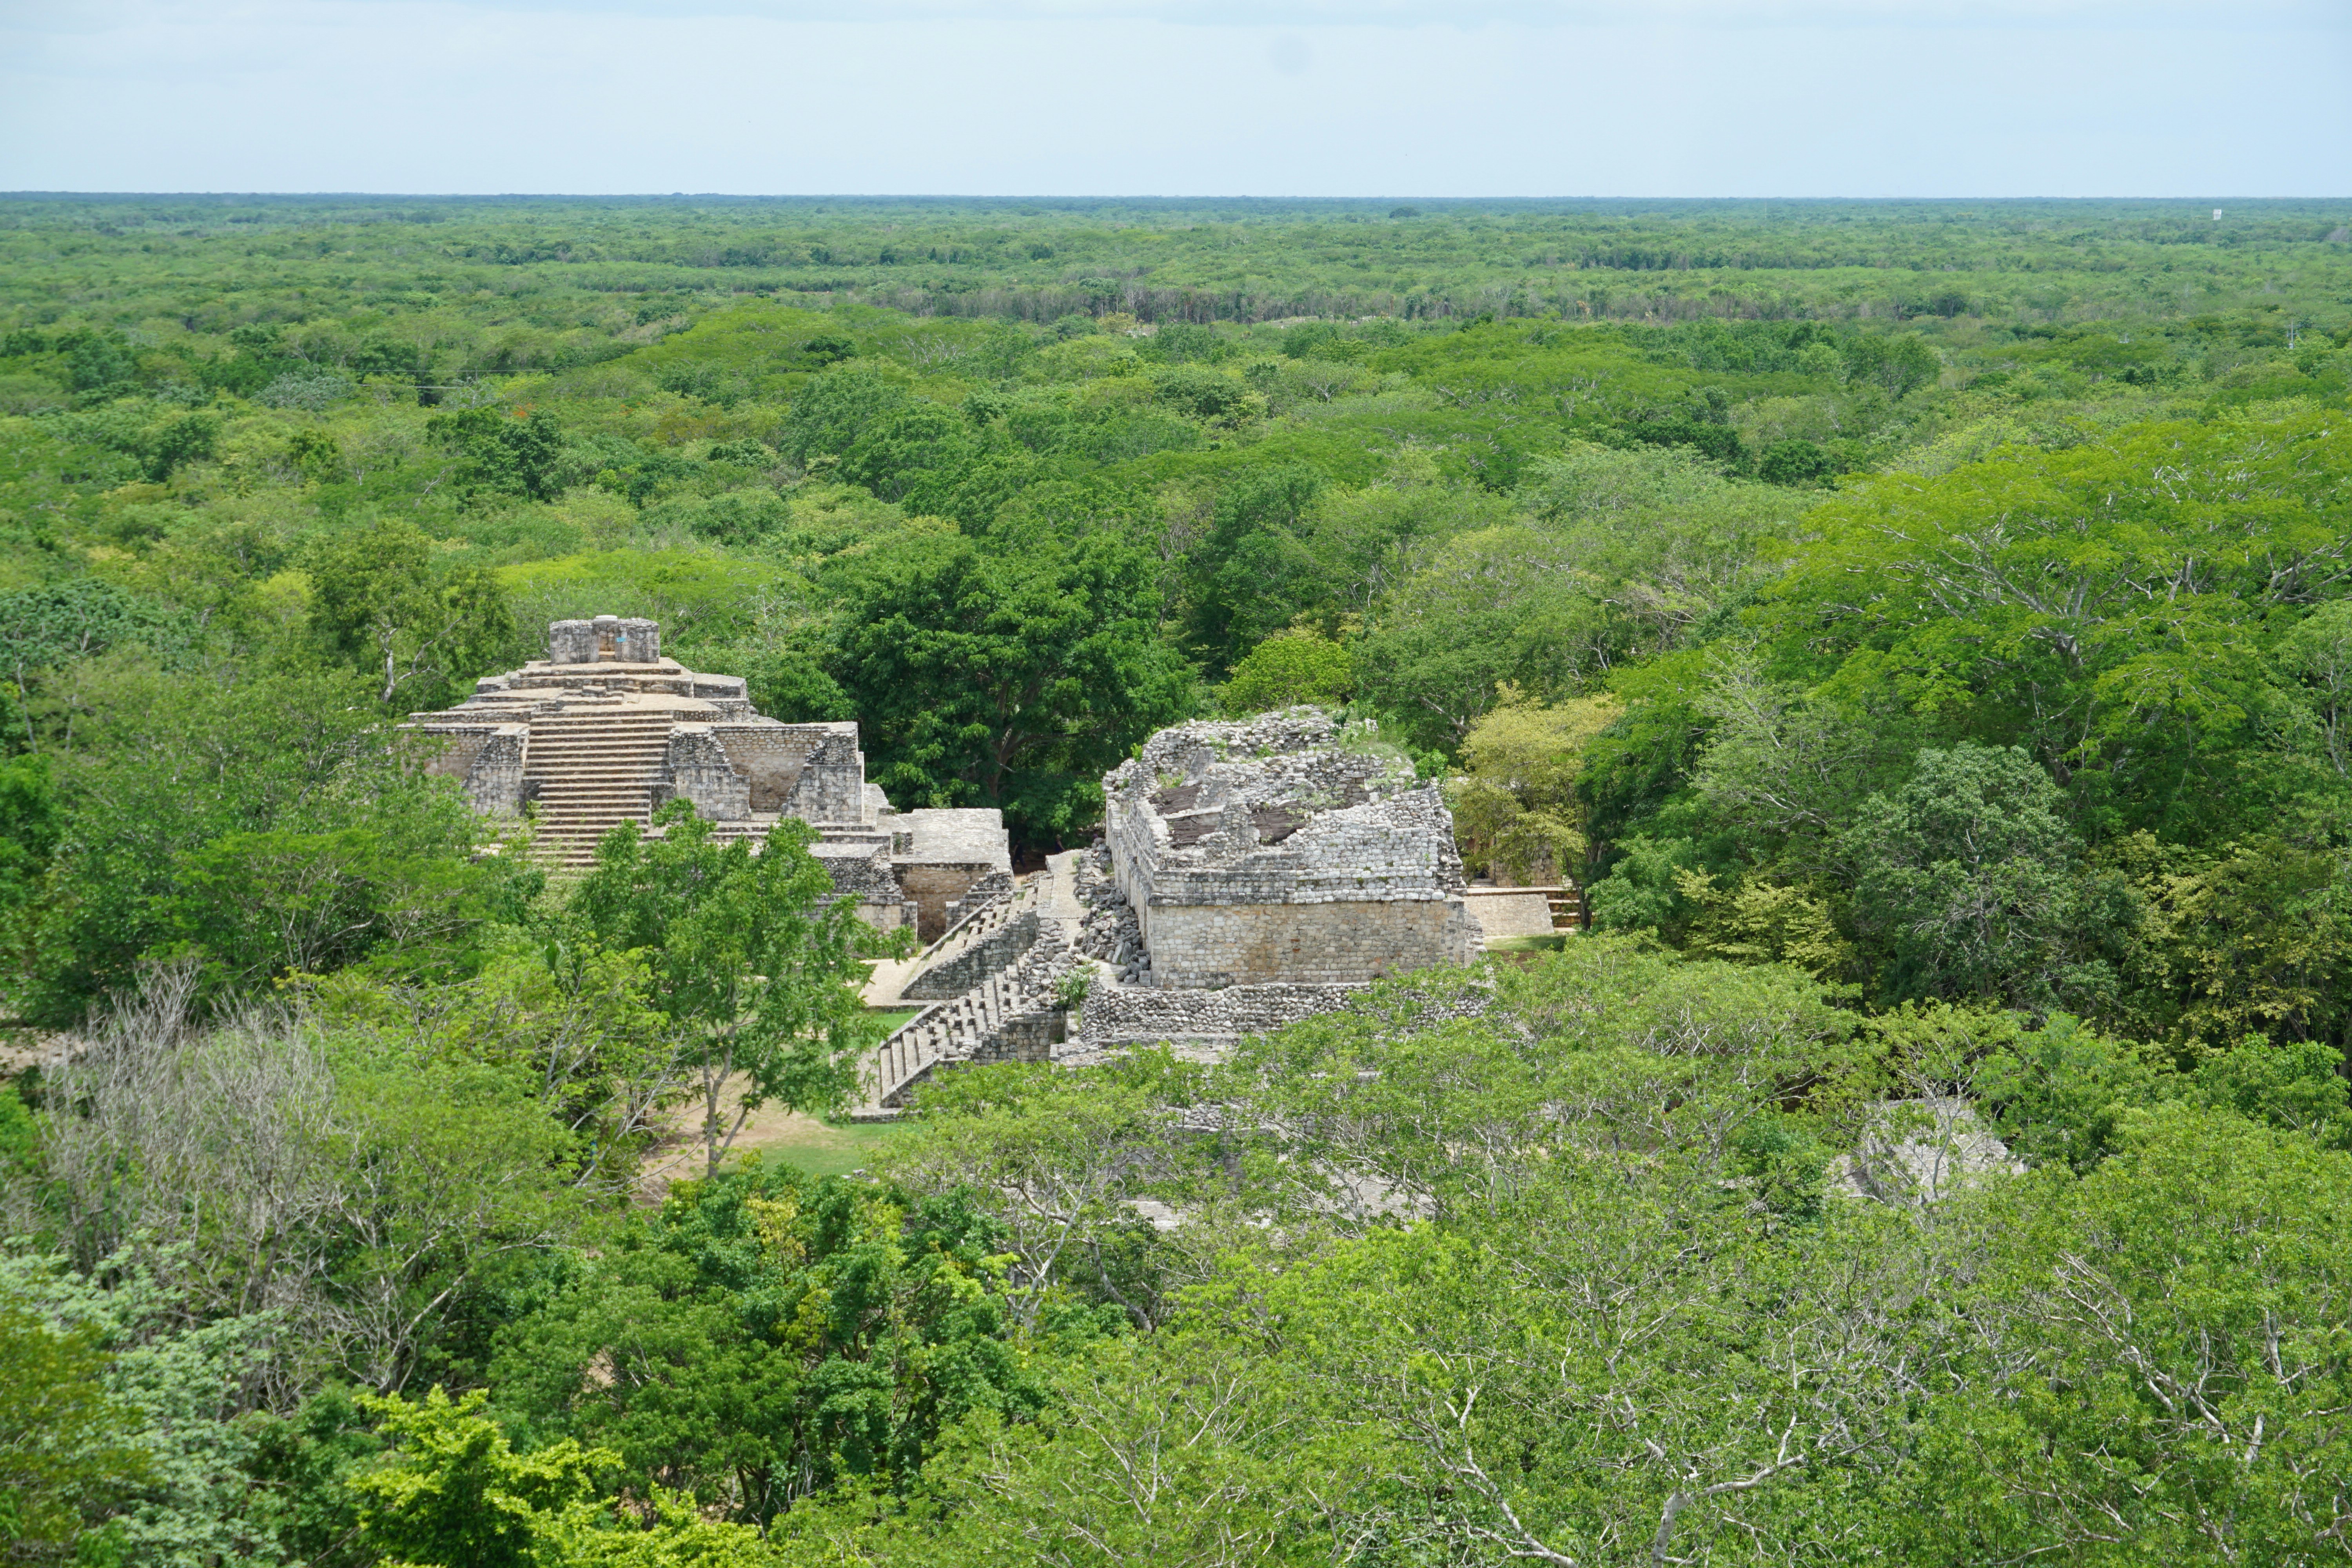 A view looking down over crumbling Mayan pyramids amidst a thick green forest